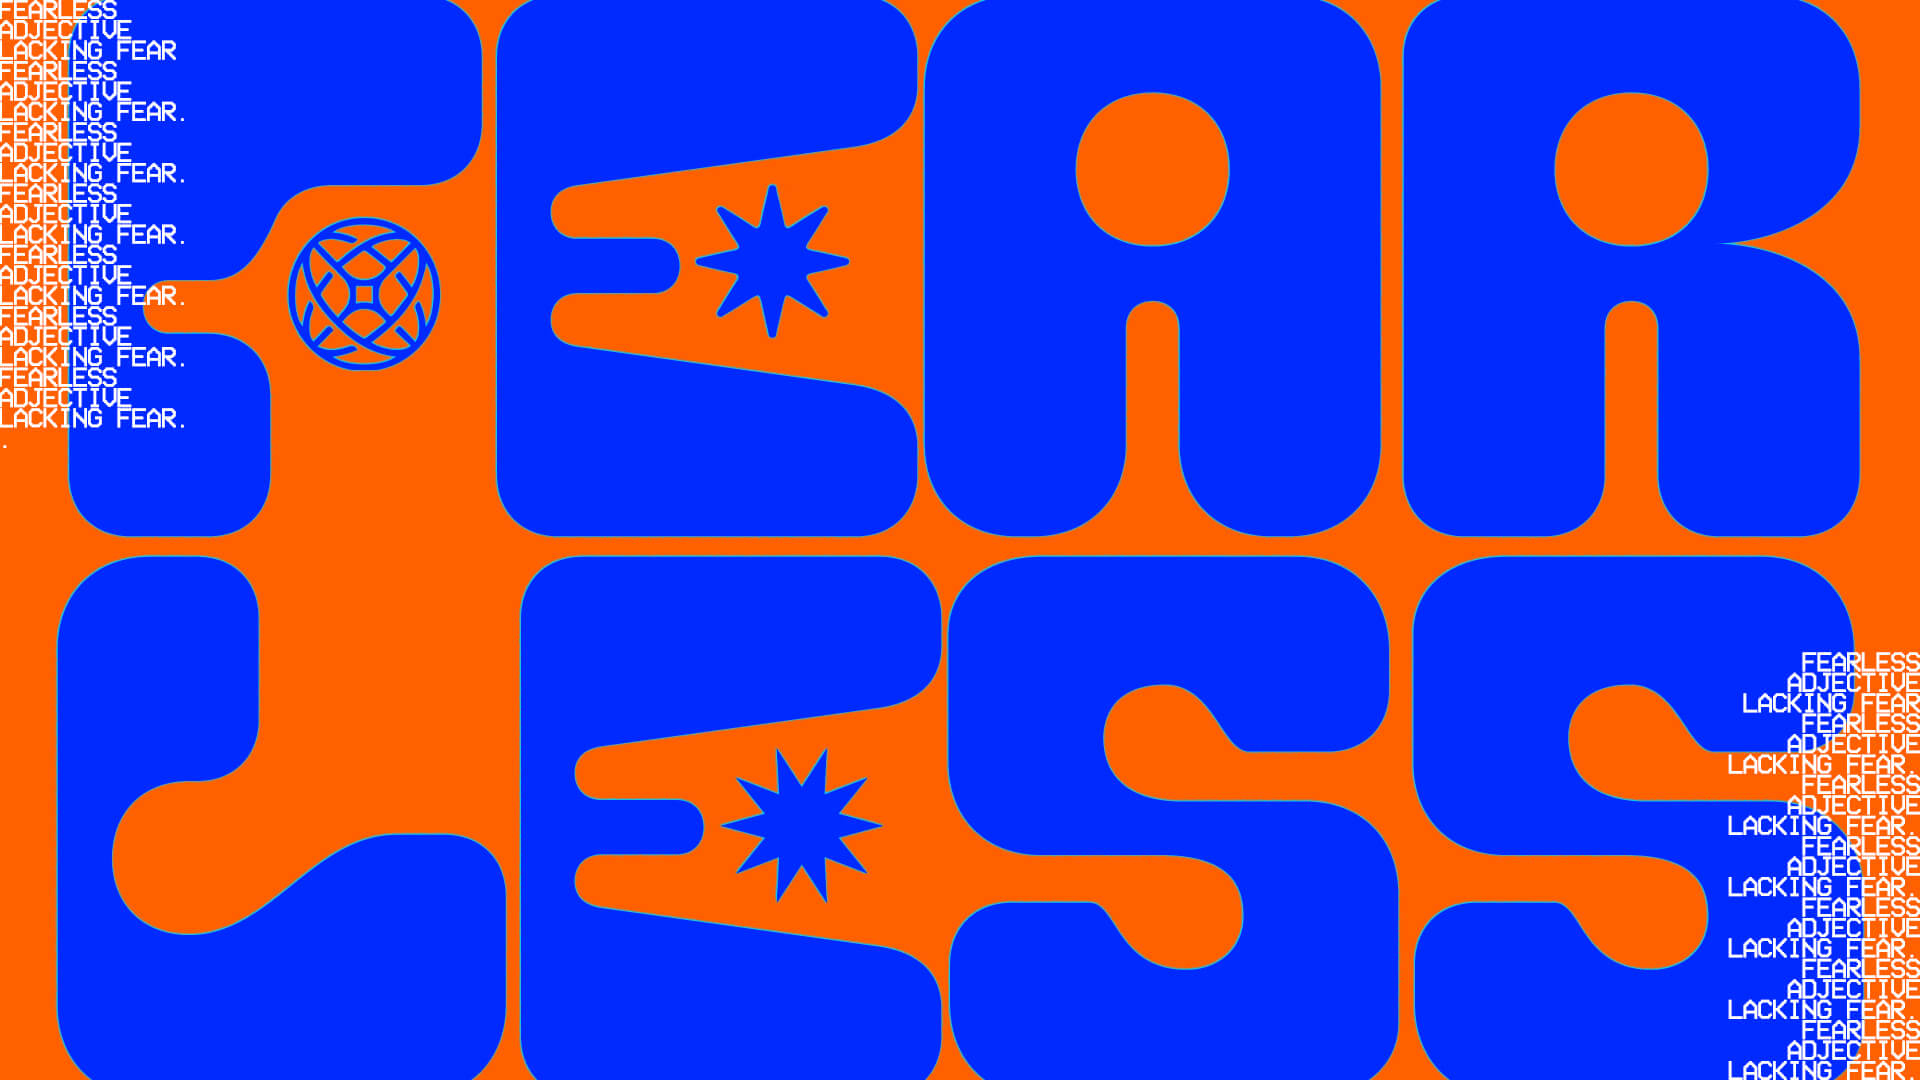 This Church Graphic Employs A Striking Blue And Orange Contrast, Spelling Out &Quot;Fearless&Quot; In A Modern, Bold Font That Communicates Strength And Courage, With The Definition Running Along The Edges, Encouraging The Congregation To Live Out Their Faith Boldly And Without Fear.